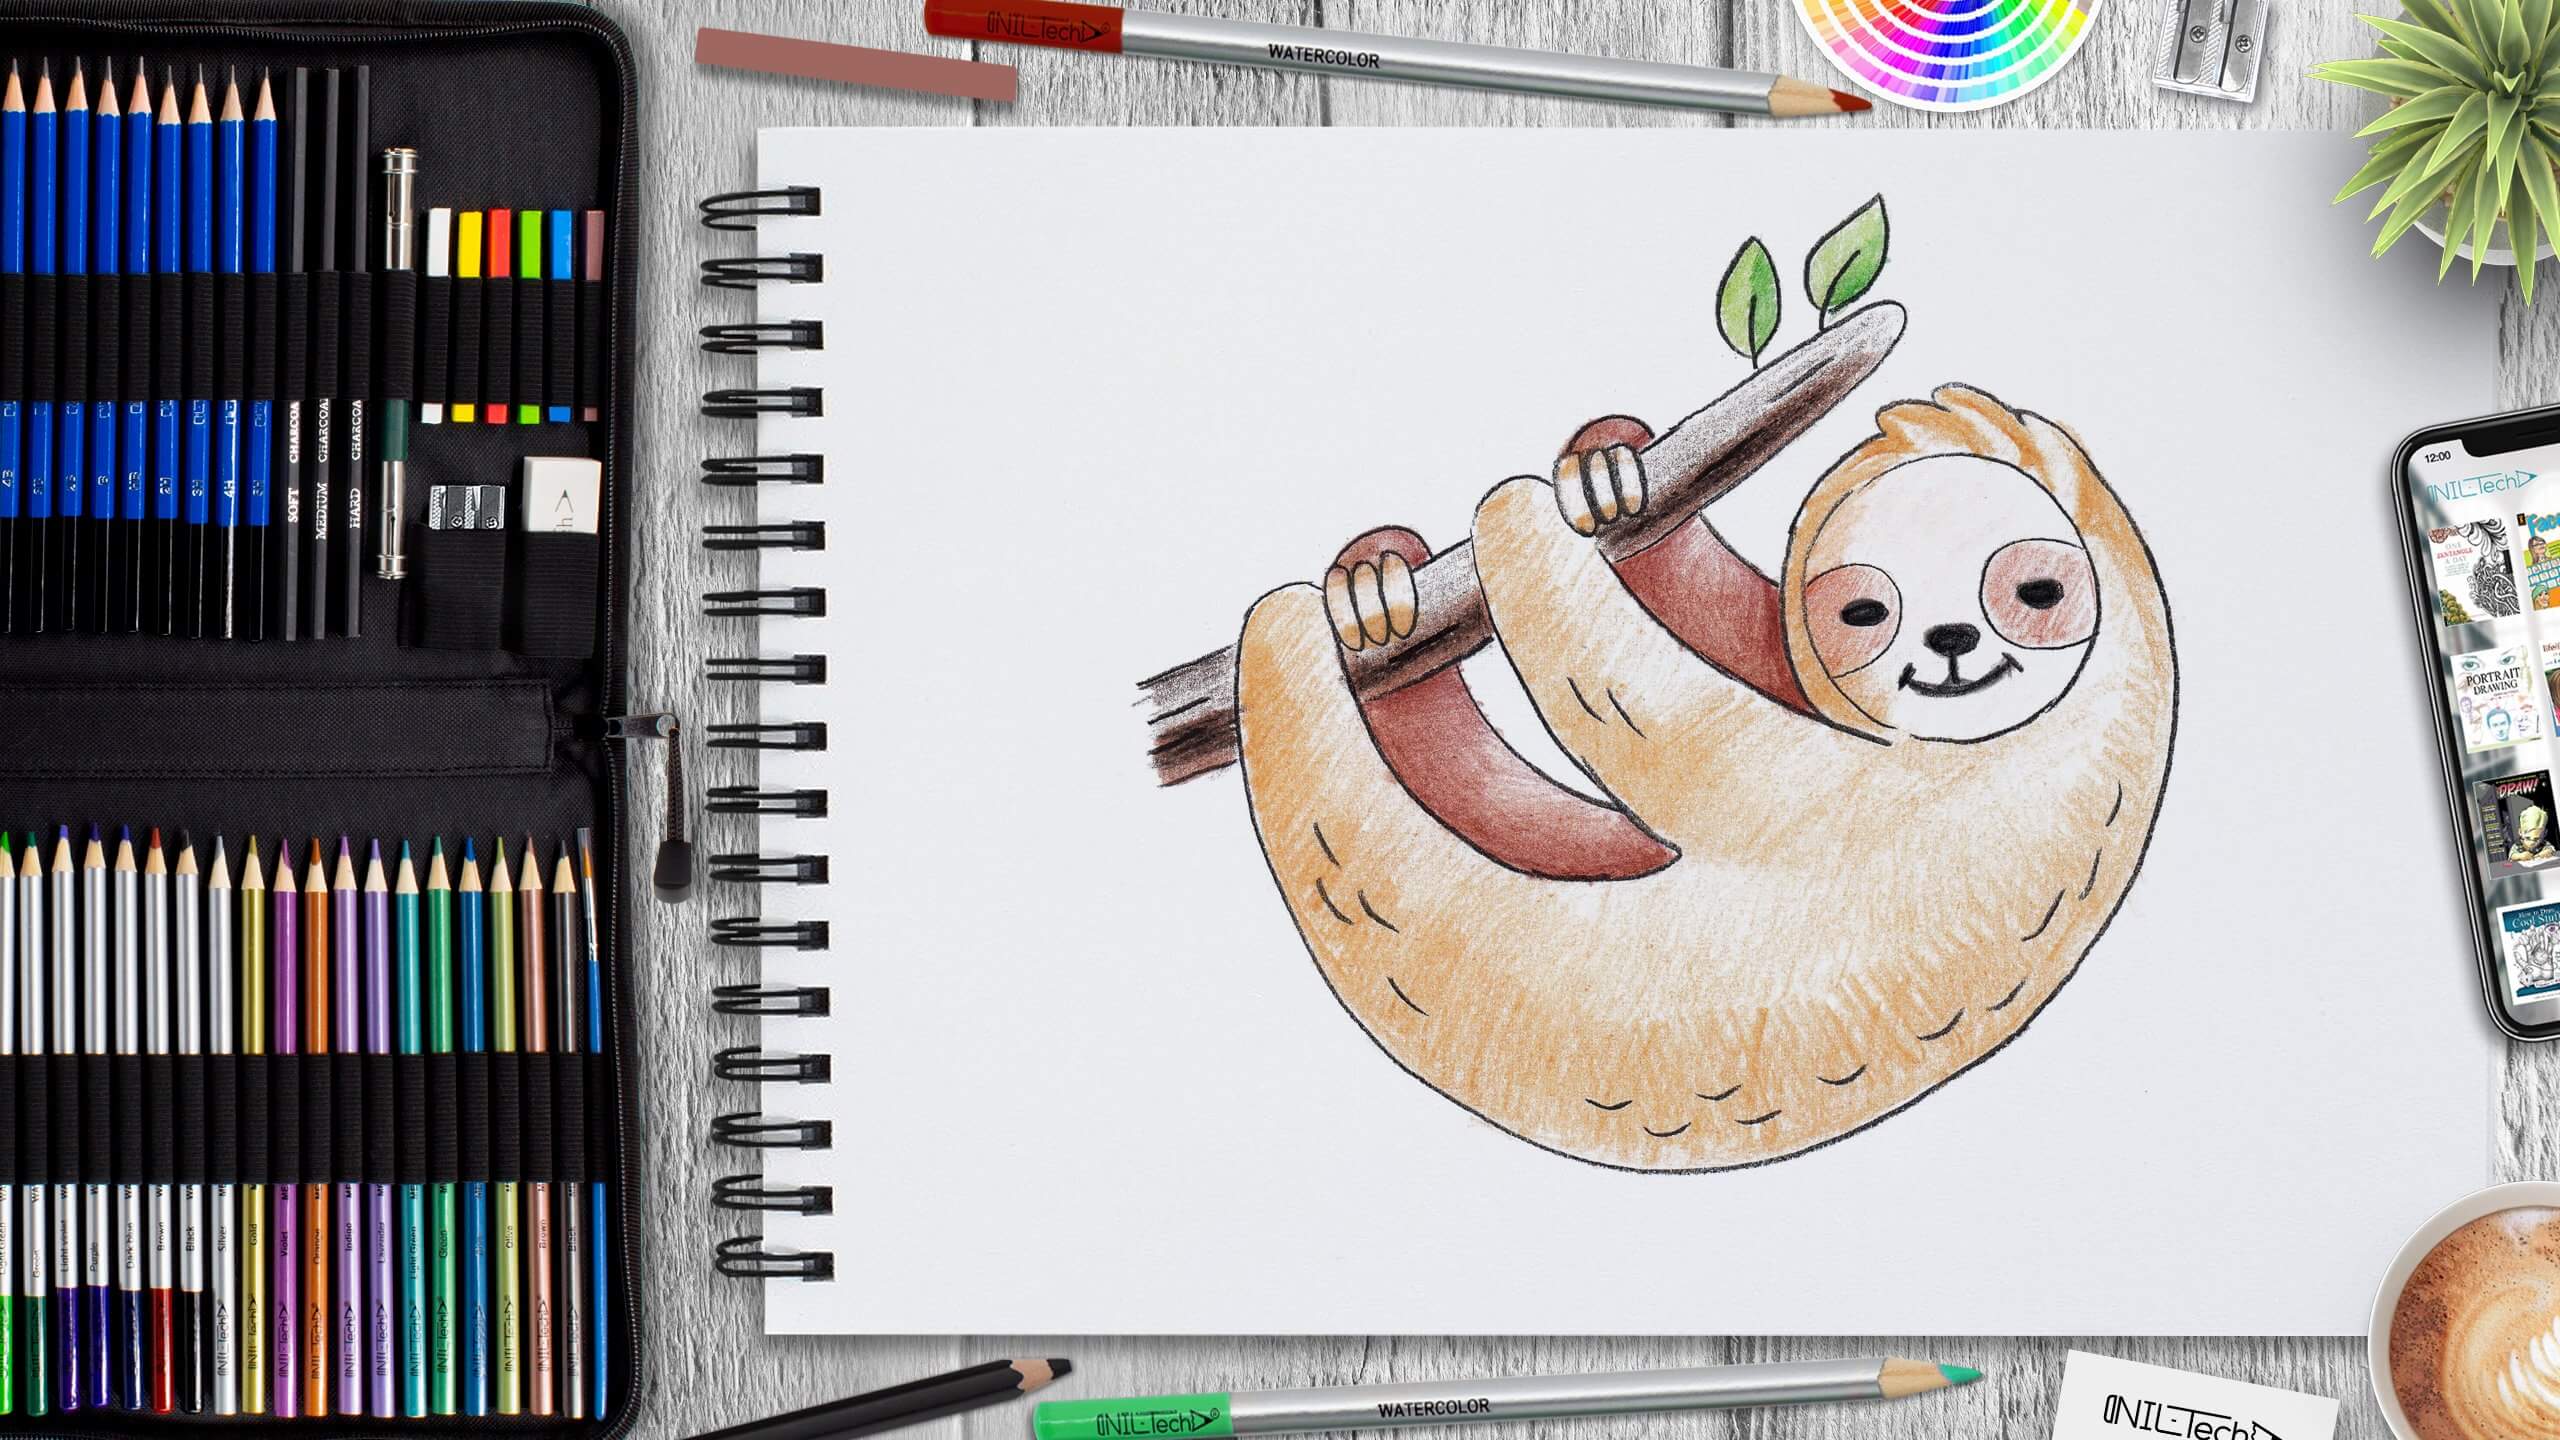 Sloth with mech arm by Yikame on DeviantArt